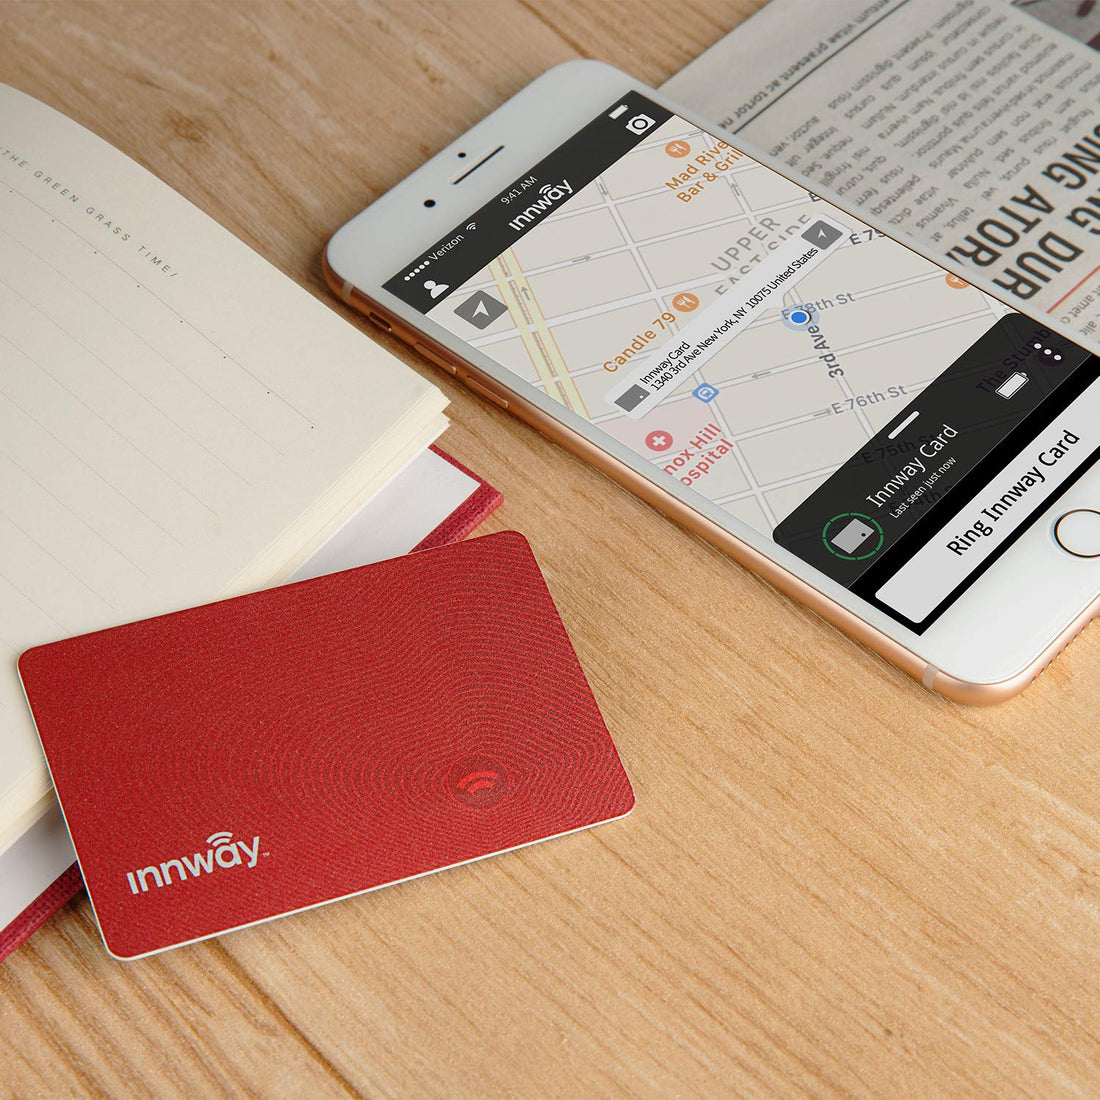 Innway Card - Credit Card Size Rechargeable Bluetooth Finder for Wallet, Passport, Luggage. iOS and Android Compatible. (Red - Limited Edition)